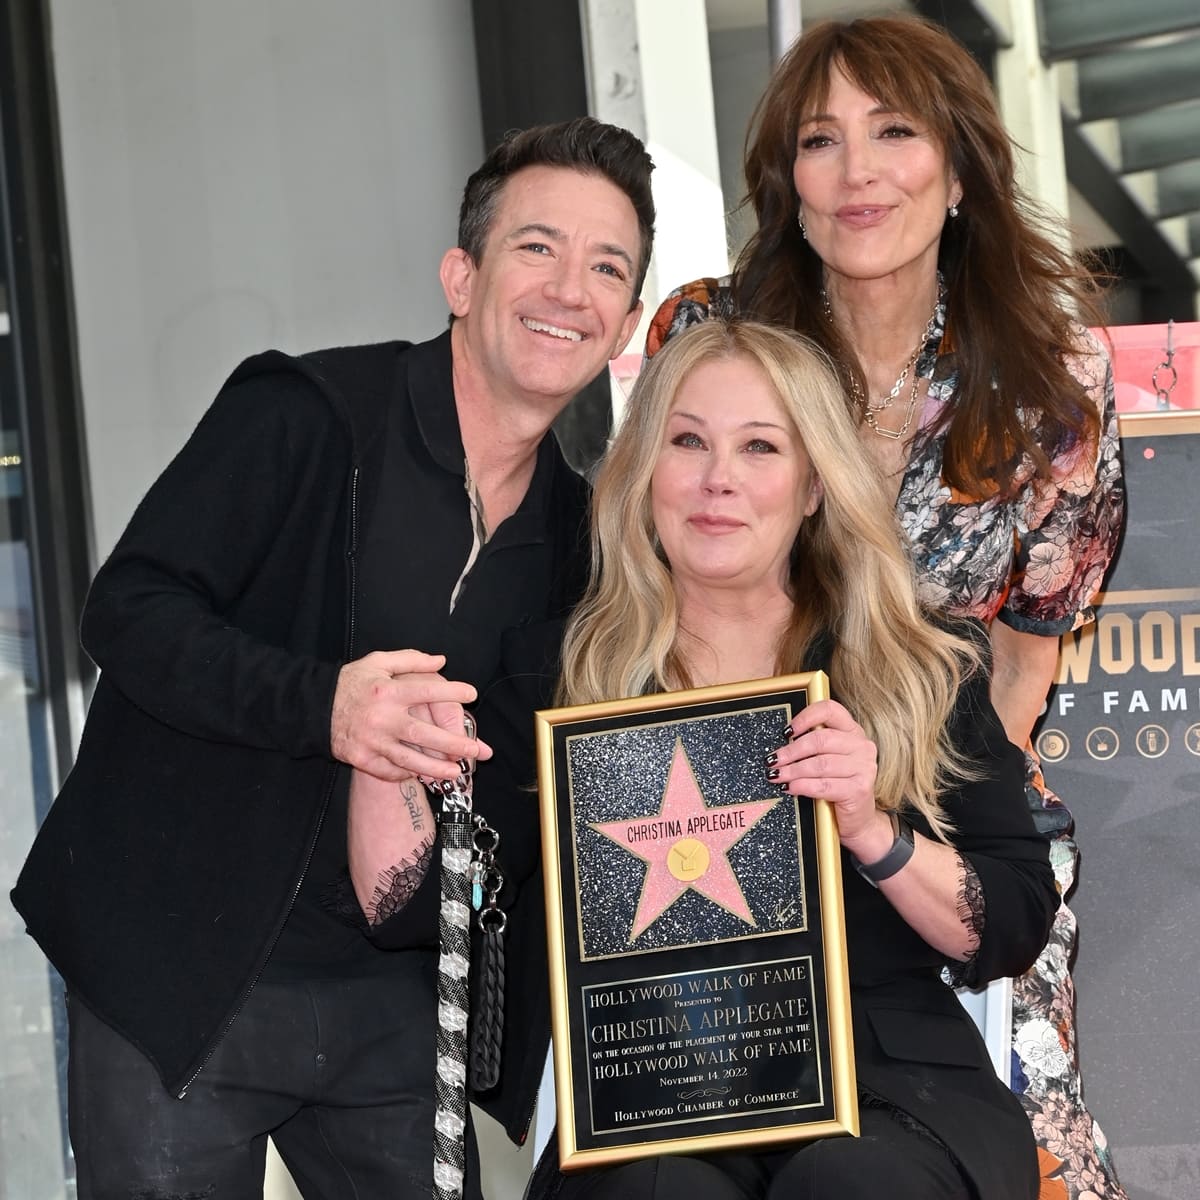 David Faustino, Katey Sagal, and Christina Applegate pose with Christina Applegate's star during her Hollywood Walk of Fame Ceremony at Hollywood Walk Of Fame